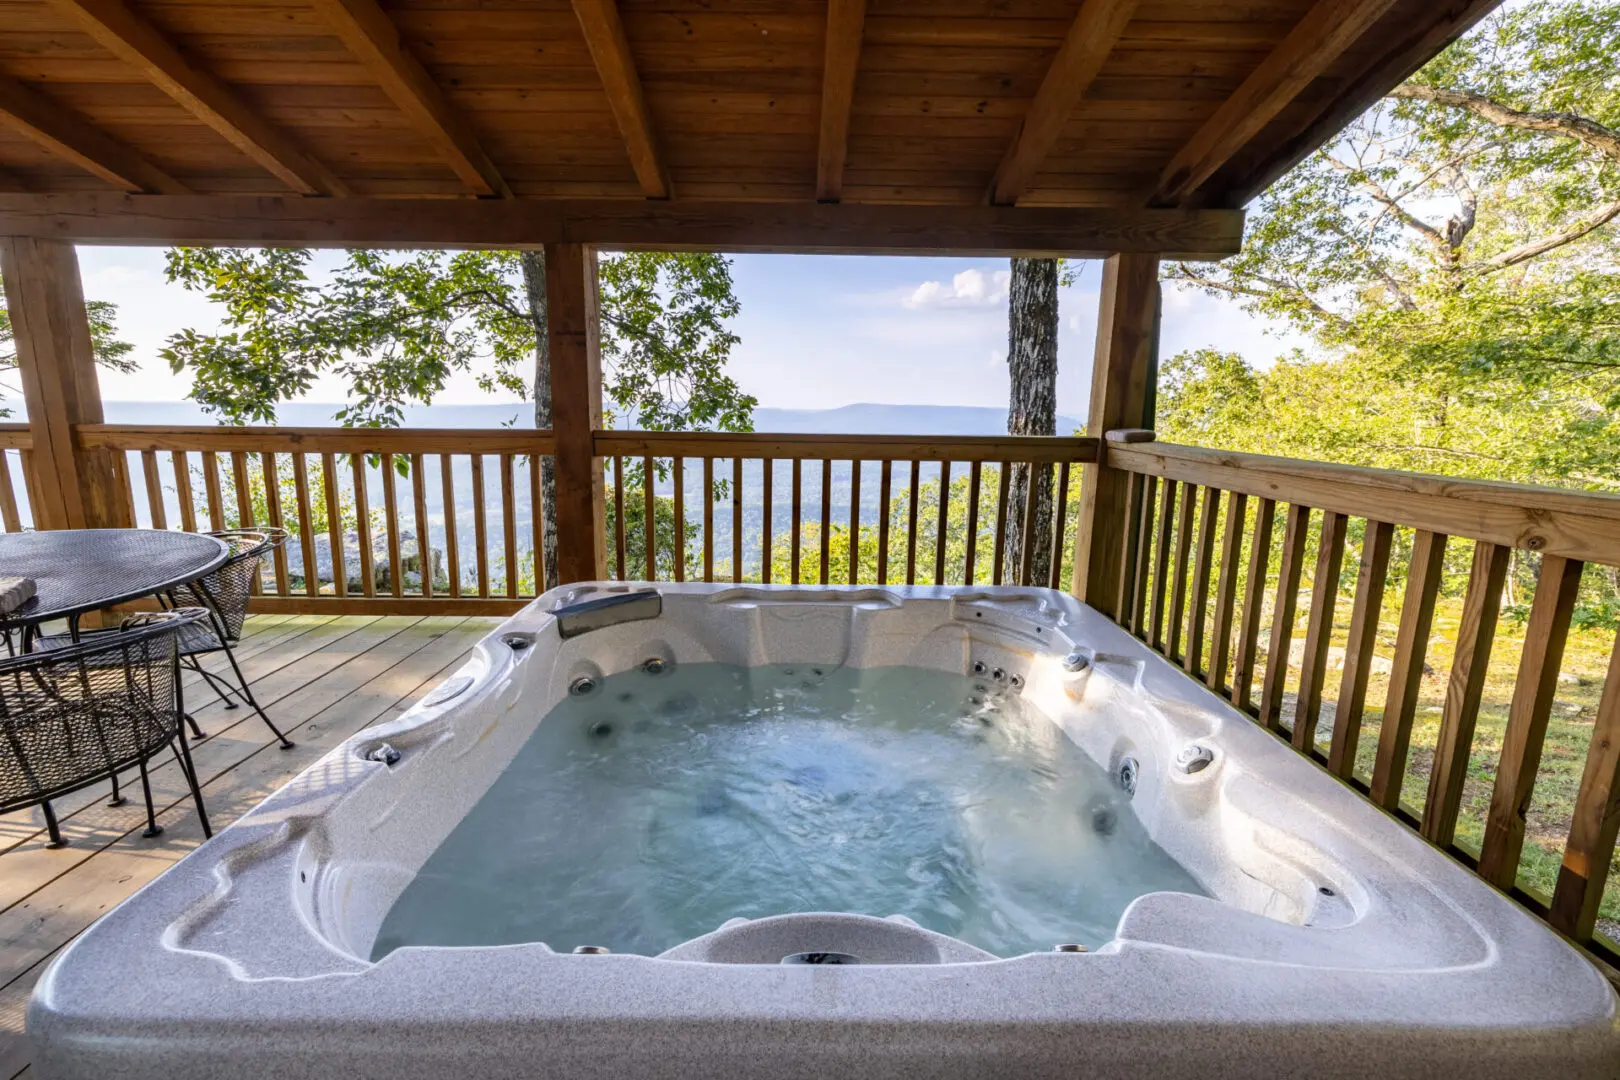 A hot tub on the deck of a cabin.